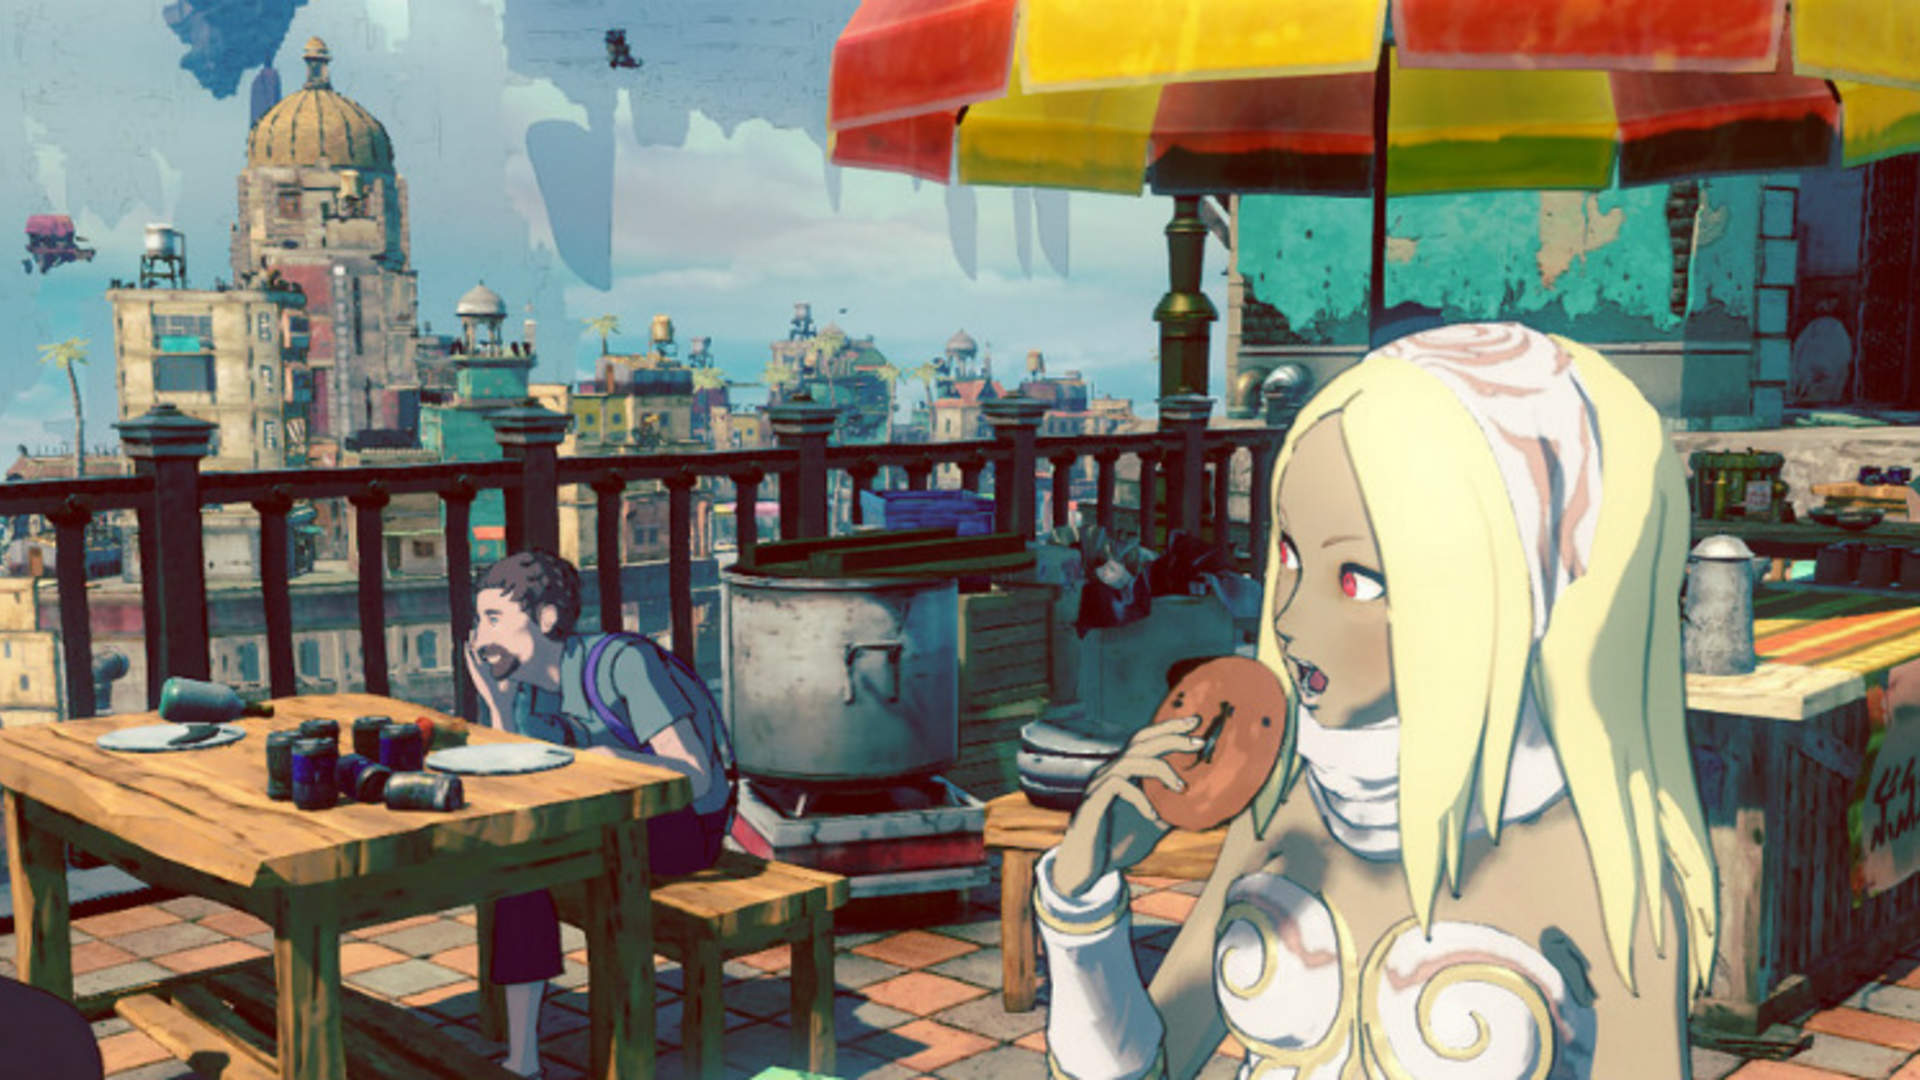 Does someone knows if Gravity Rush Remastered and Gravity rush 2, got well.